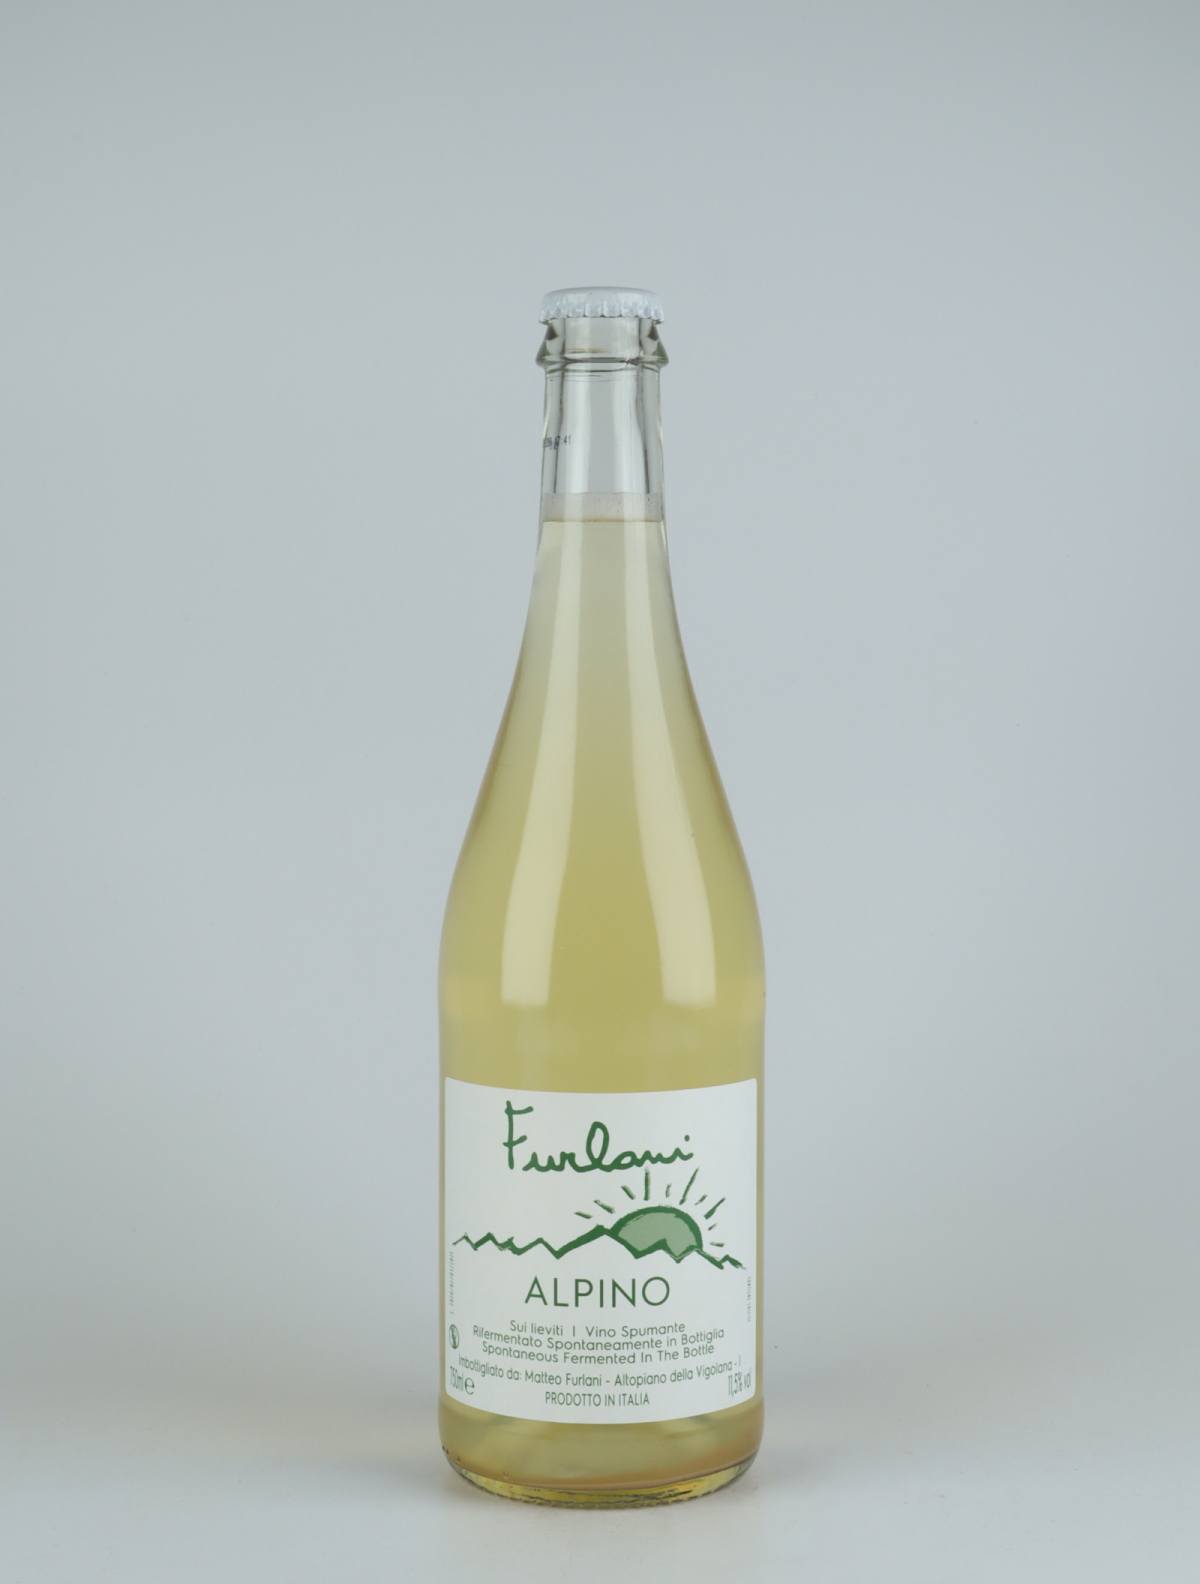 A bottle 2020 Alpino Sparkling from Cantina Furlani, Alto Adige in Italy